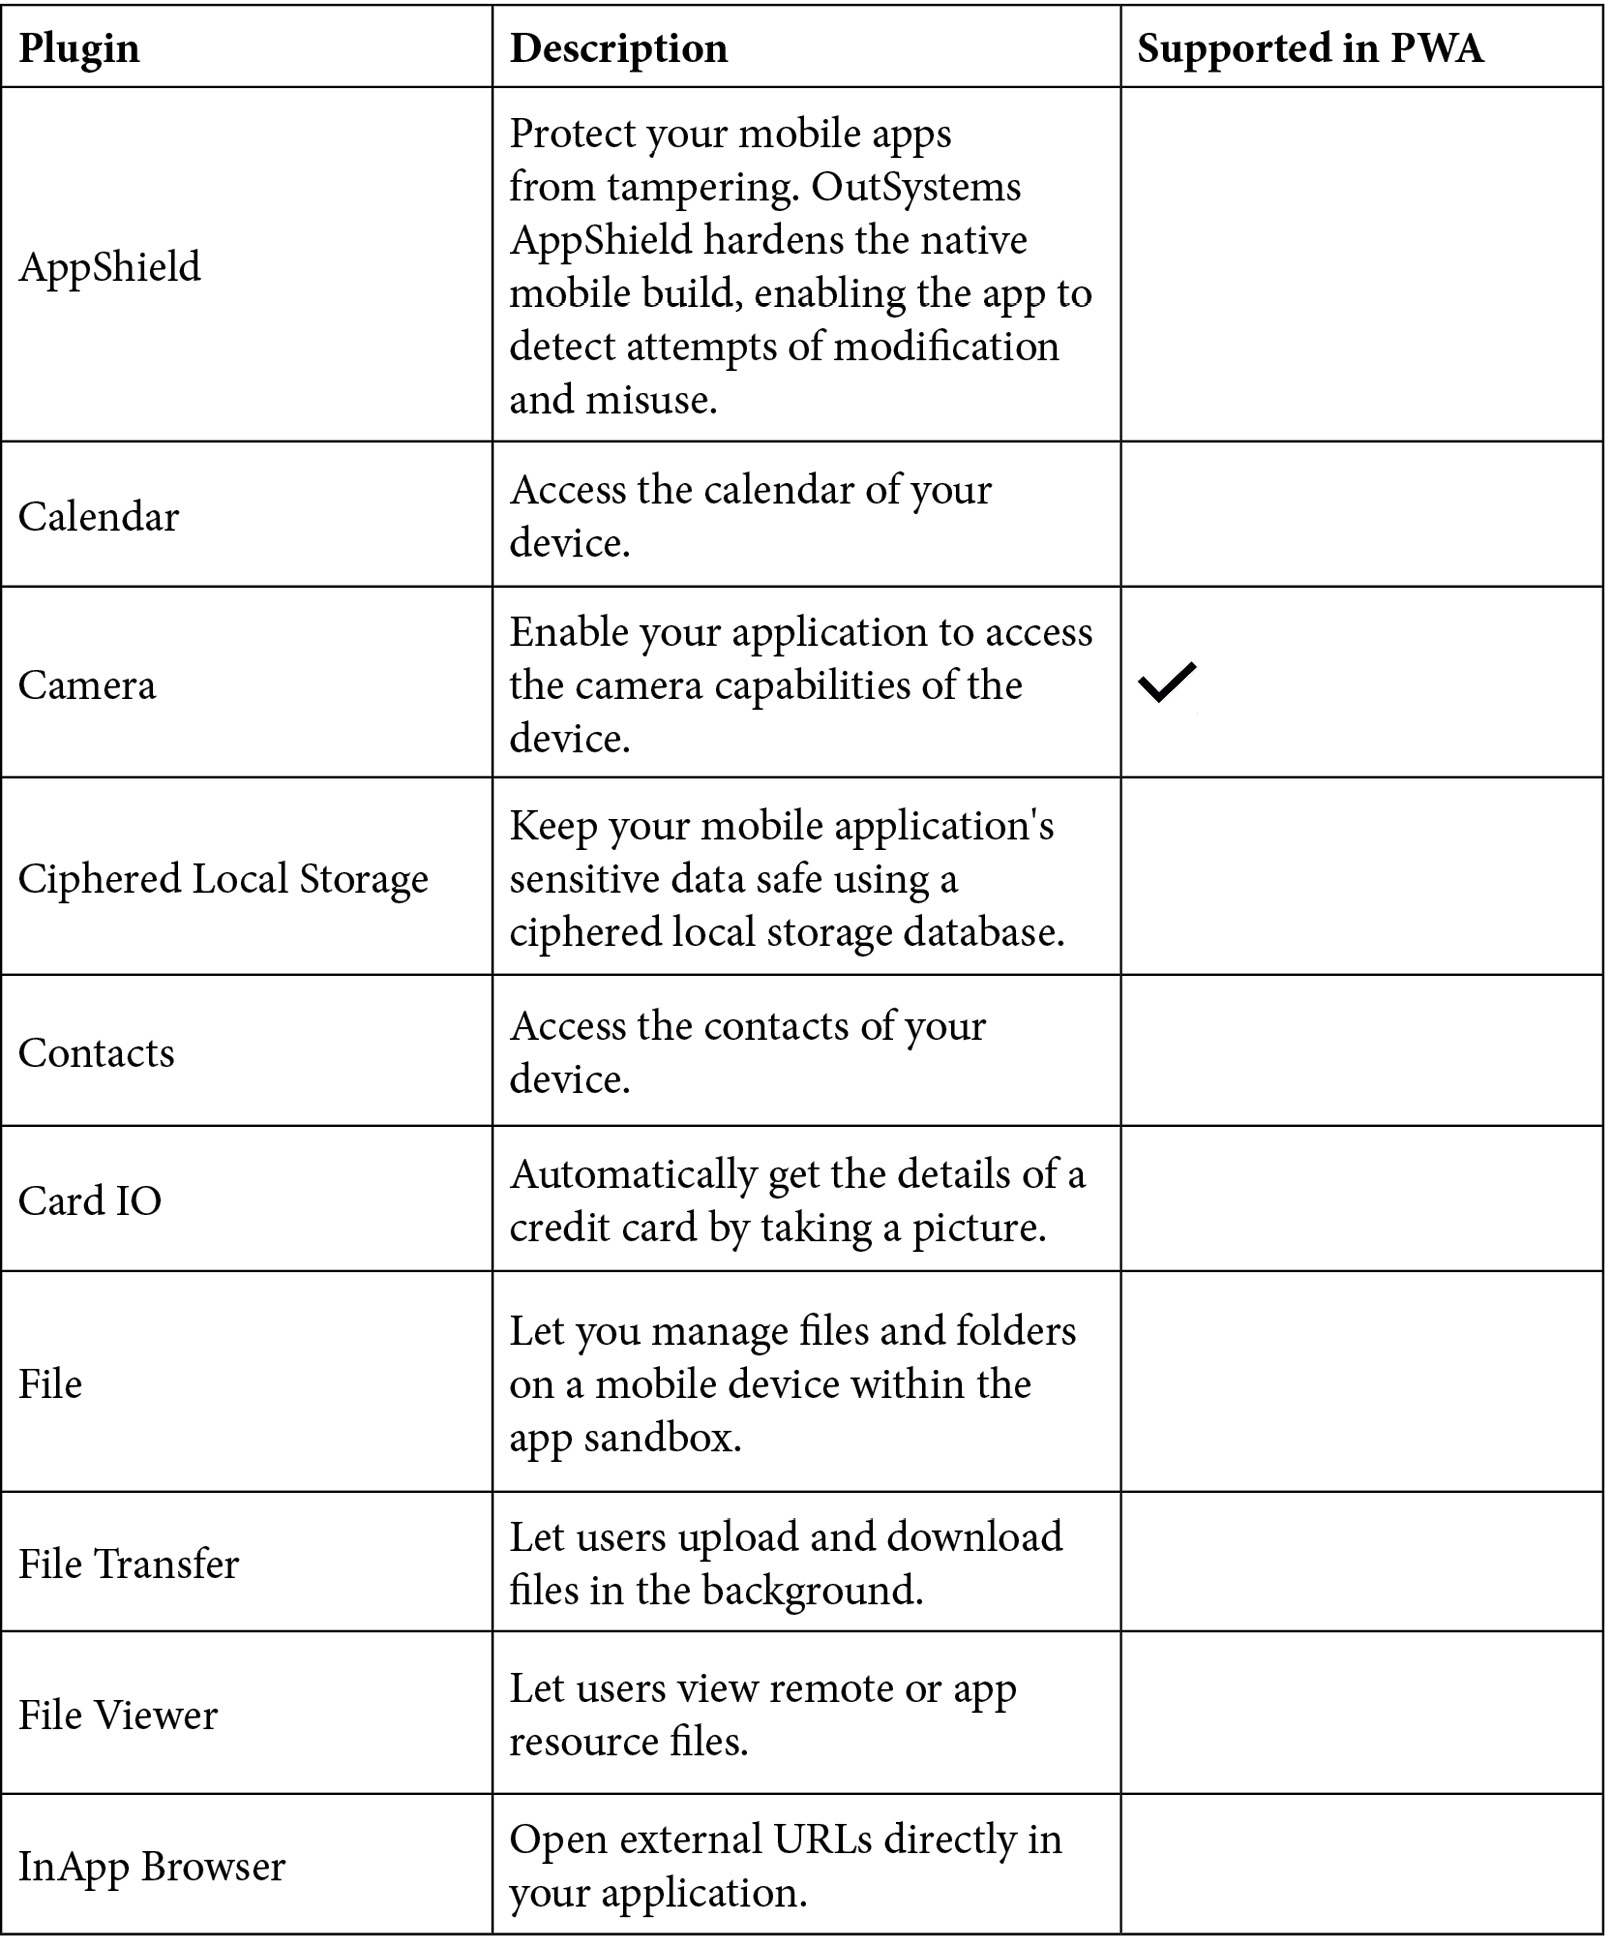 Figure 9.2 – Table of the supported mobile plugins
